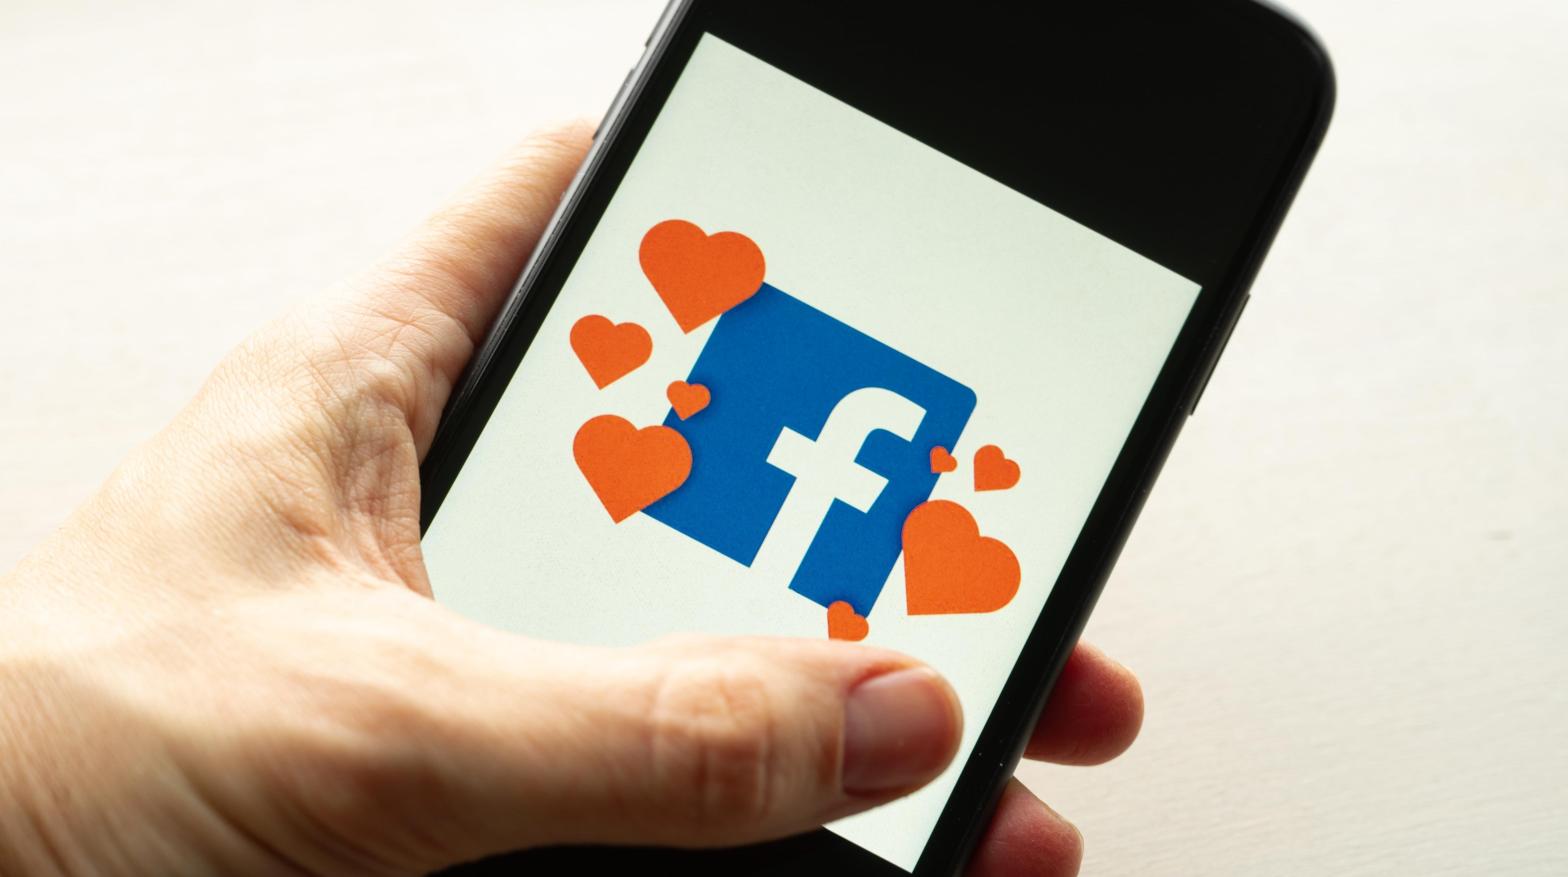 Facebook dating debuted in 2019, but three years later it's looking to make sure the people using the service are actual adults using a third-party company's AI systems. (Photo: Boumen Japet, Shutterstock)